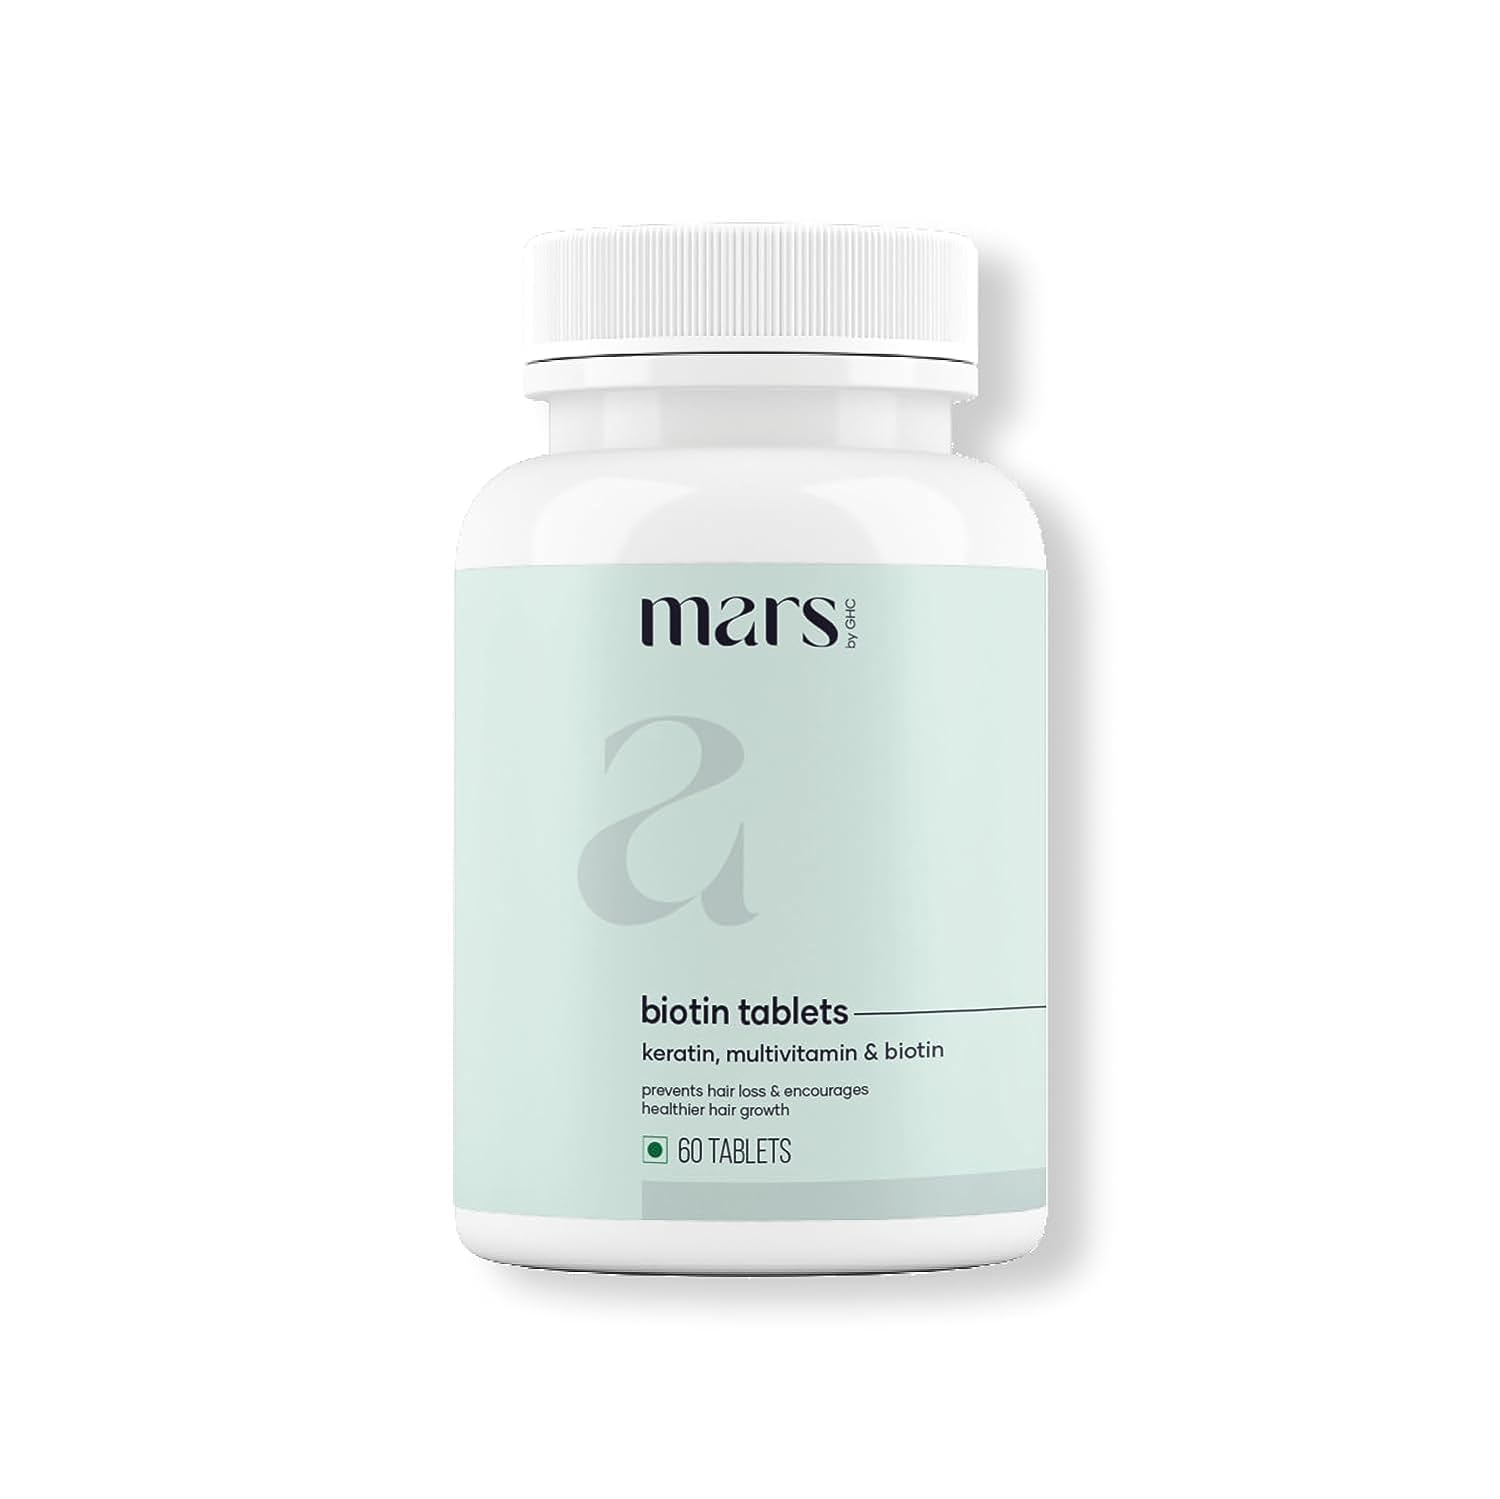 mars by GHC Hair Biotin – 100% Vegan, 60 Tablets (Pack of 1) | Promotes Healthy & Strong Hair Growth, Powered With Keratin, Amino Acids, Grape Seed Extract & Other Natural Supplements